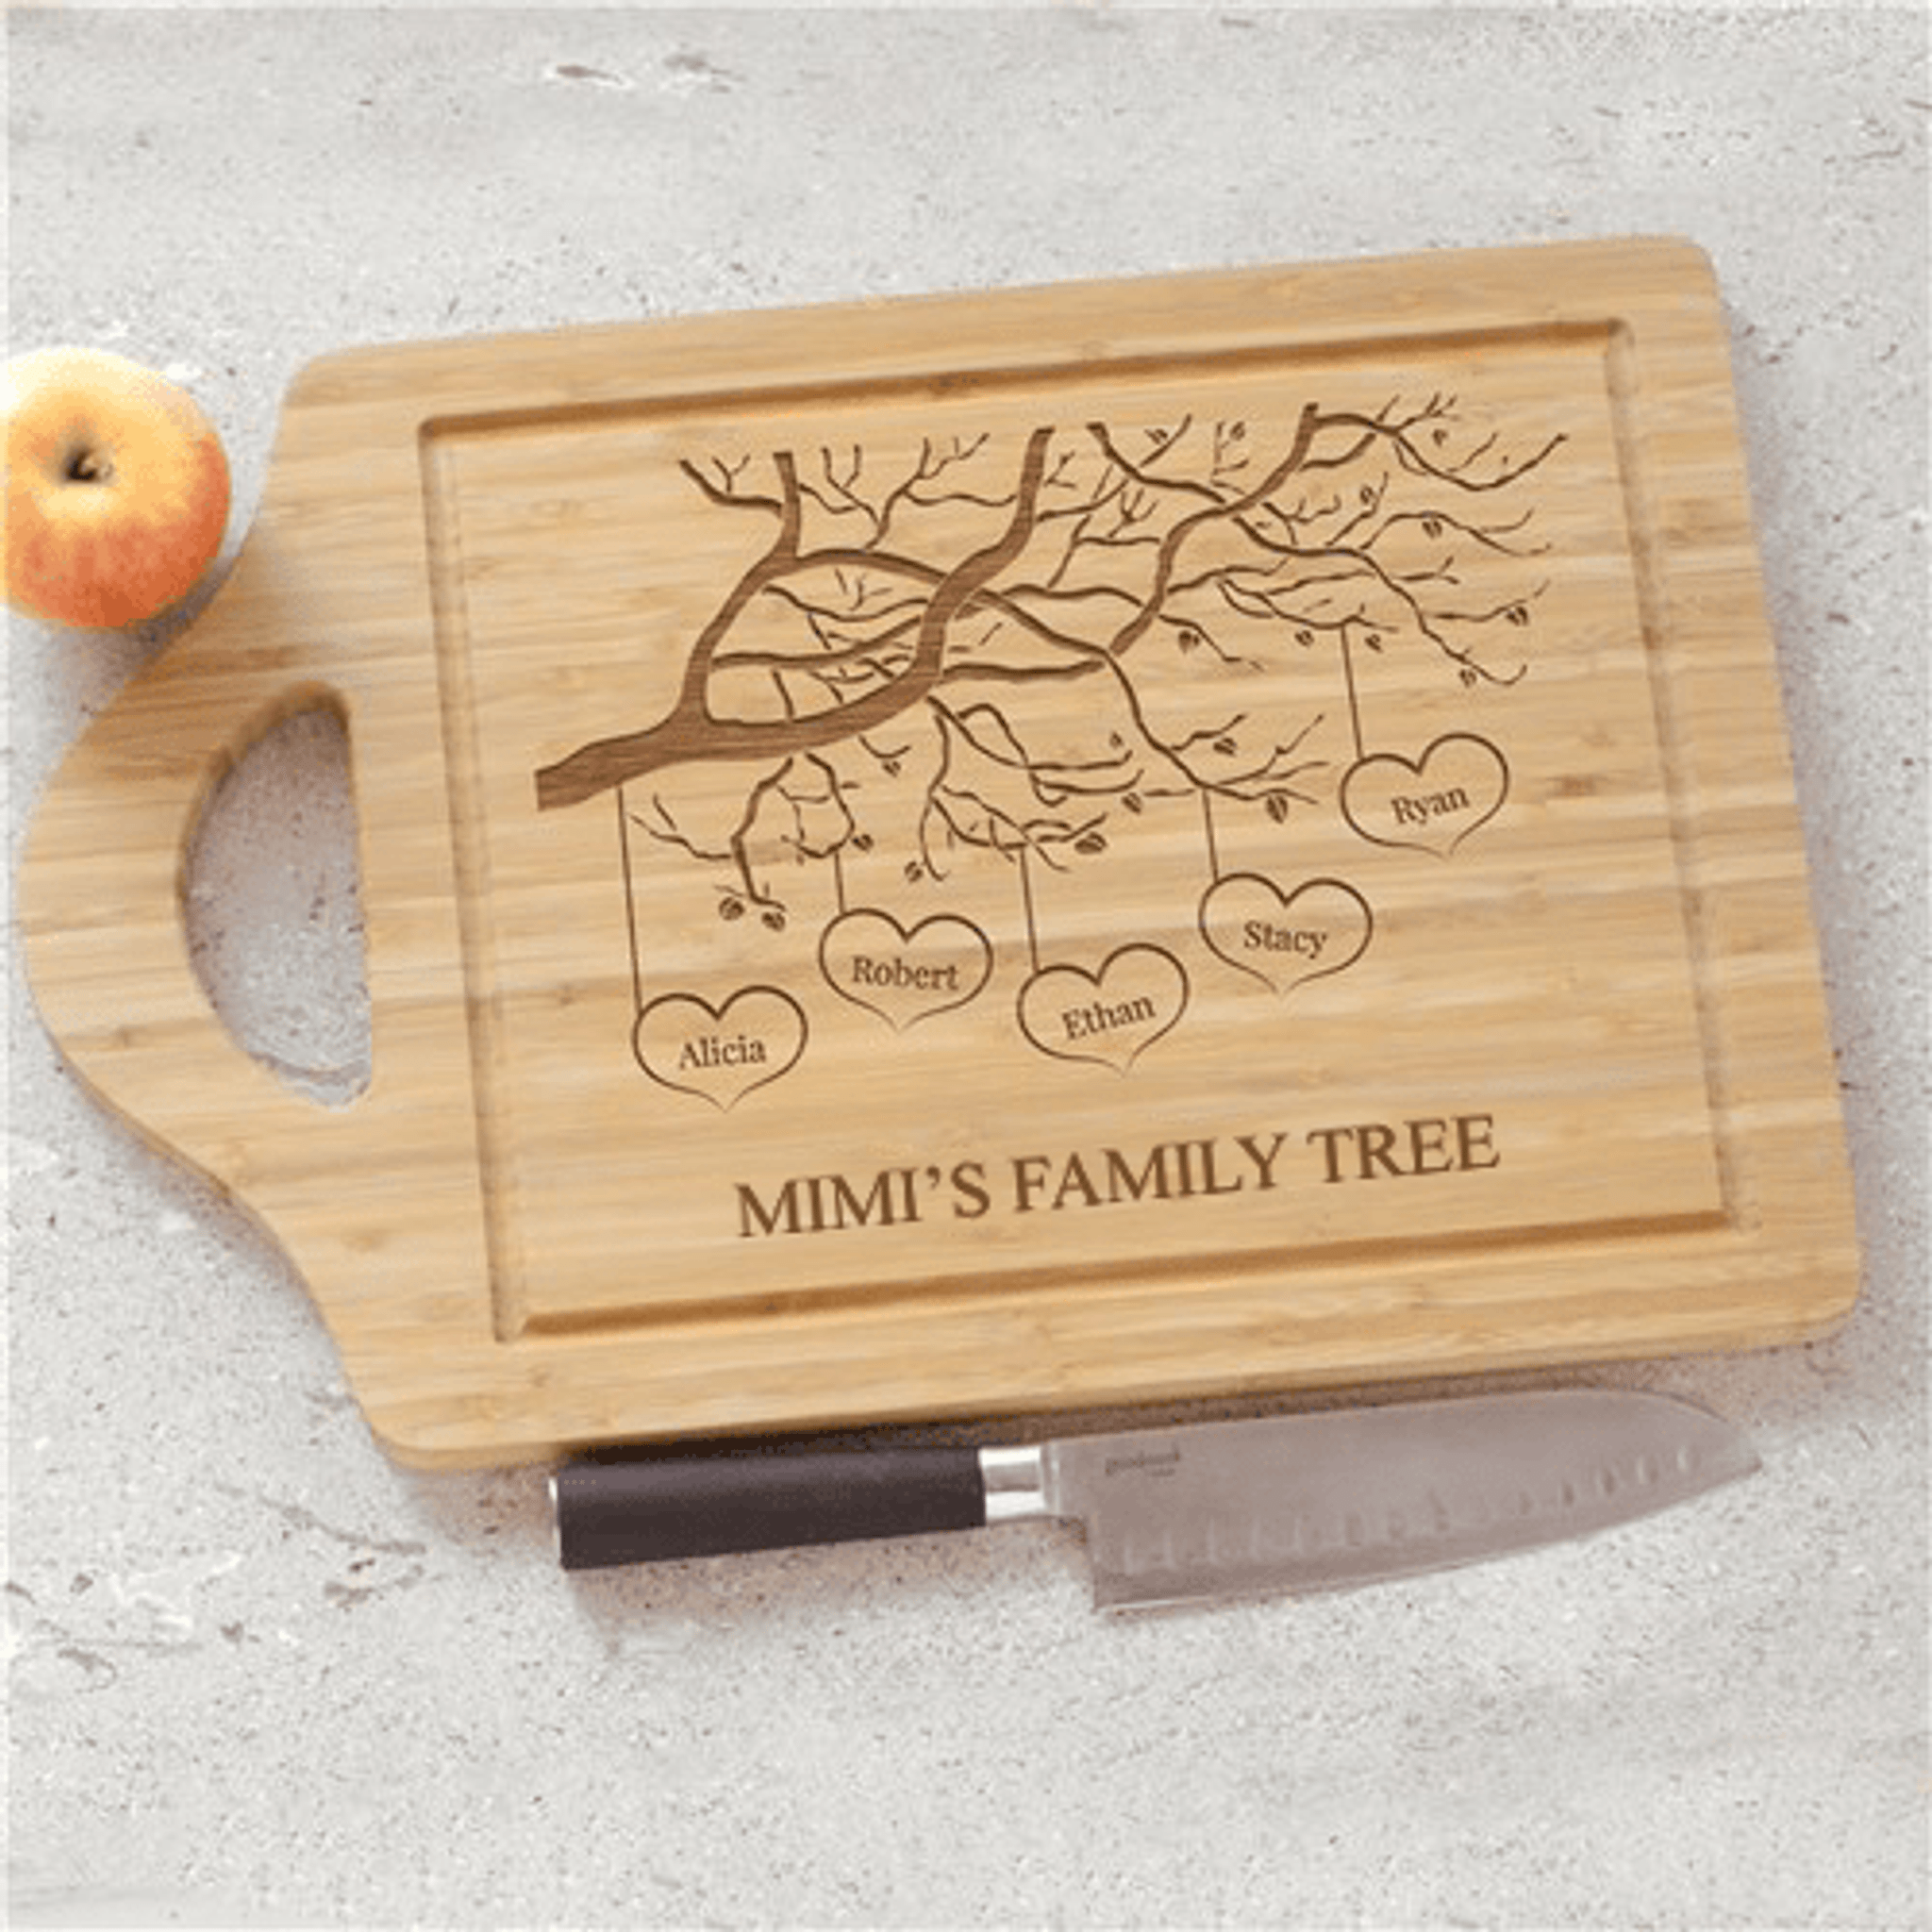 Personalized Cutting Boards  Engraved Wood Cutting Boards - Forest Decor